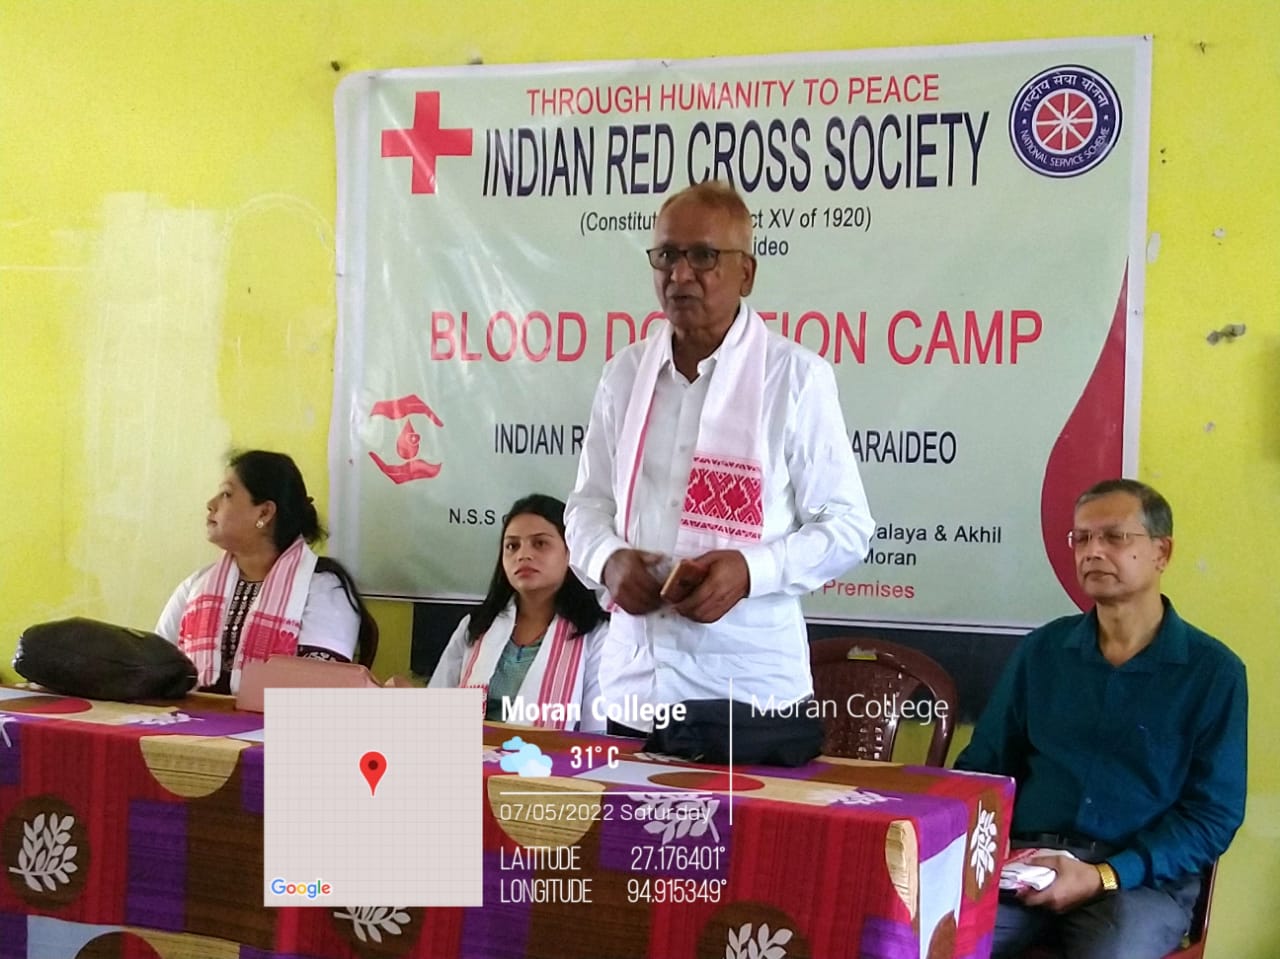 Blood Donation Camp (Date- 07/05/2022)